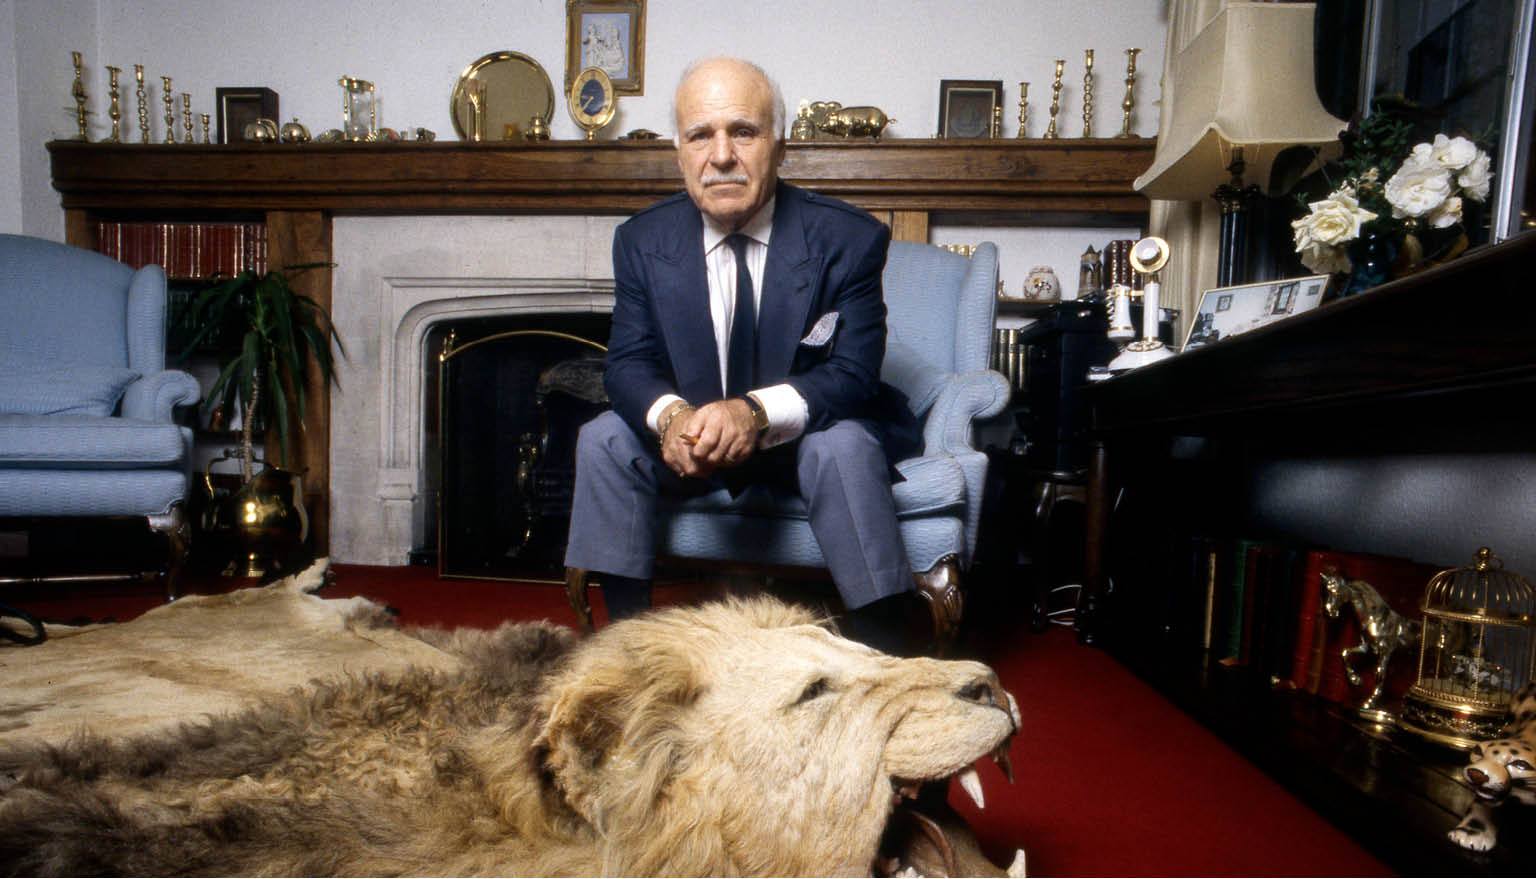 Music manager Don Arden (1926 - 2007), portrait, at home, near London, United Kingdom, 1995. Arden is the father of Sharon Osbourne and managed the Small Faces, Electric Light Orchestra and Black Sabbath. (Photo by Martyn Goodacre/Getty Images)